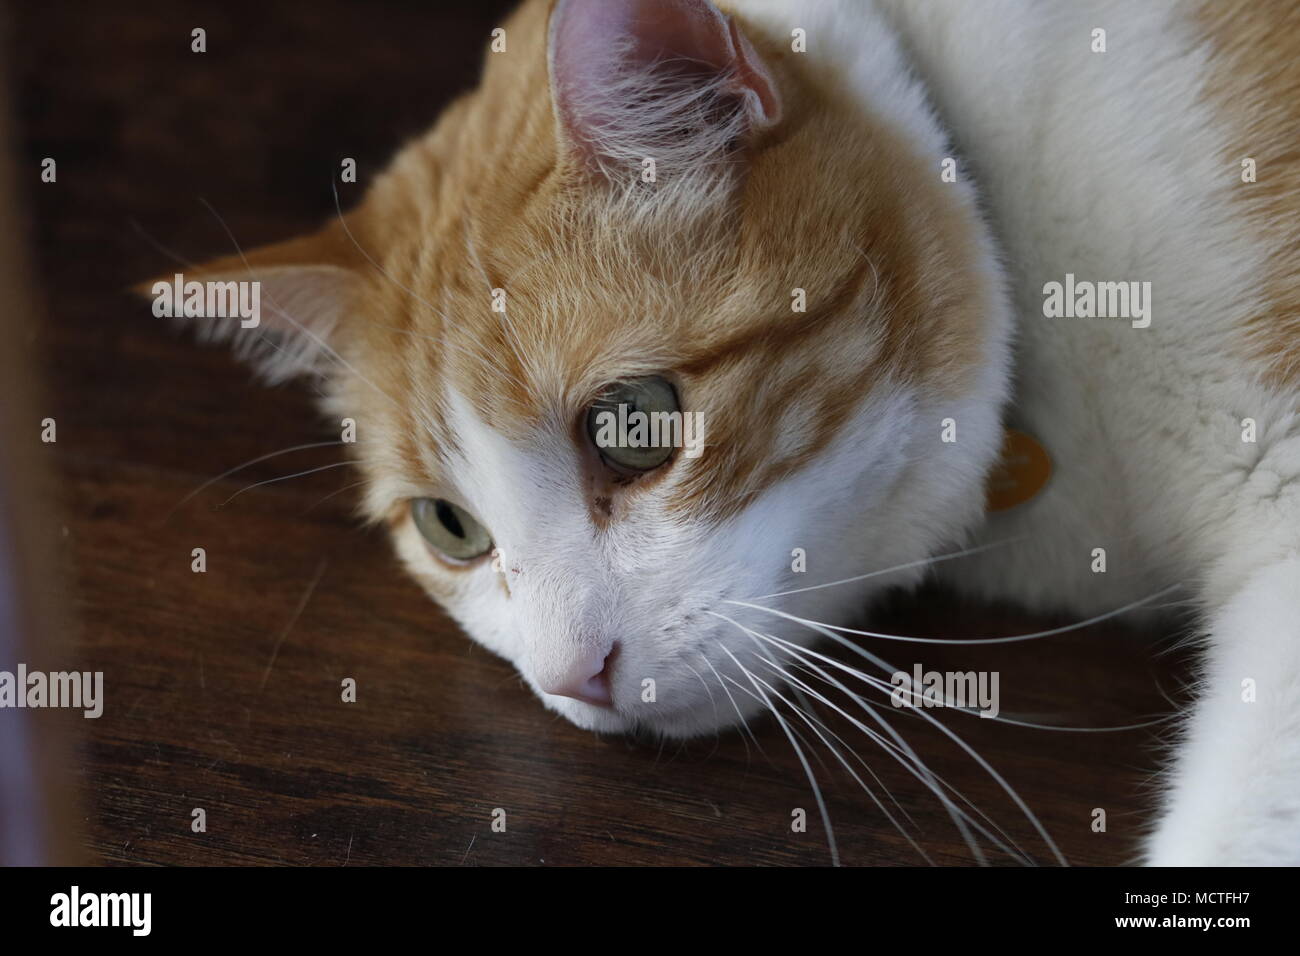 An orange and white cat lays on the floor, looking concerned. Stock Photo